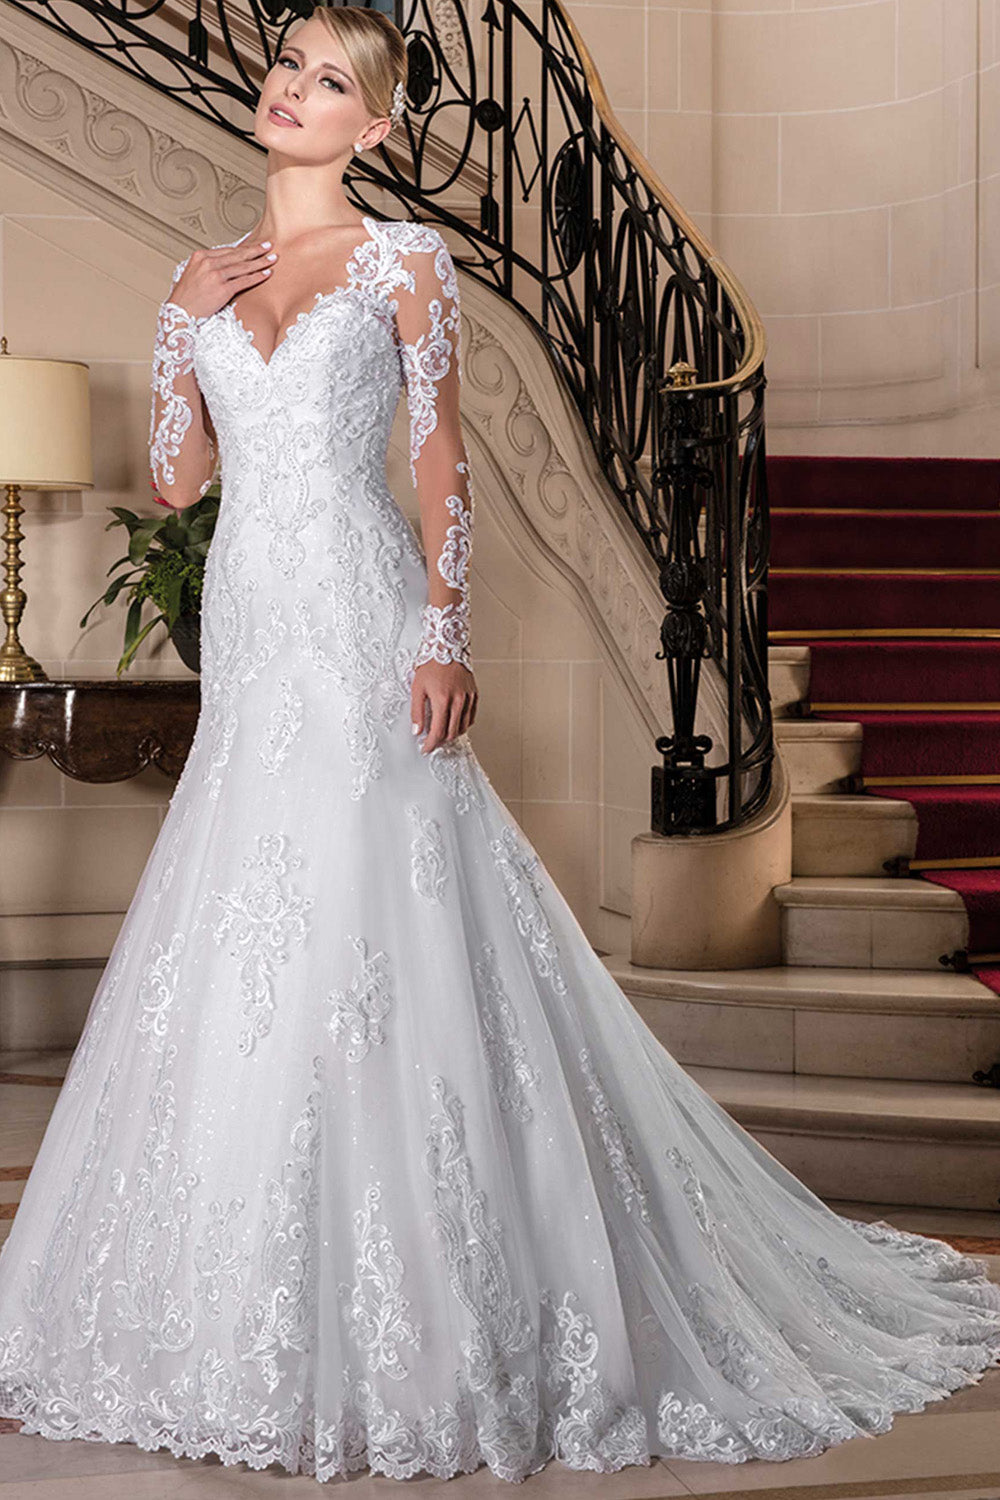 V-Neck Long Sleeves Wedding Dresses with Lace Appliques